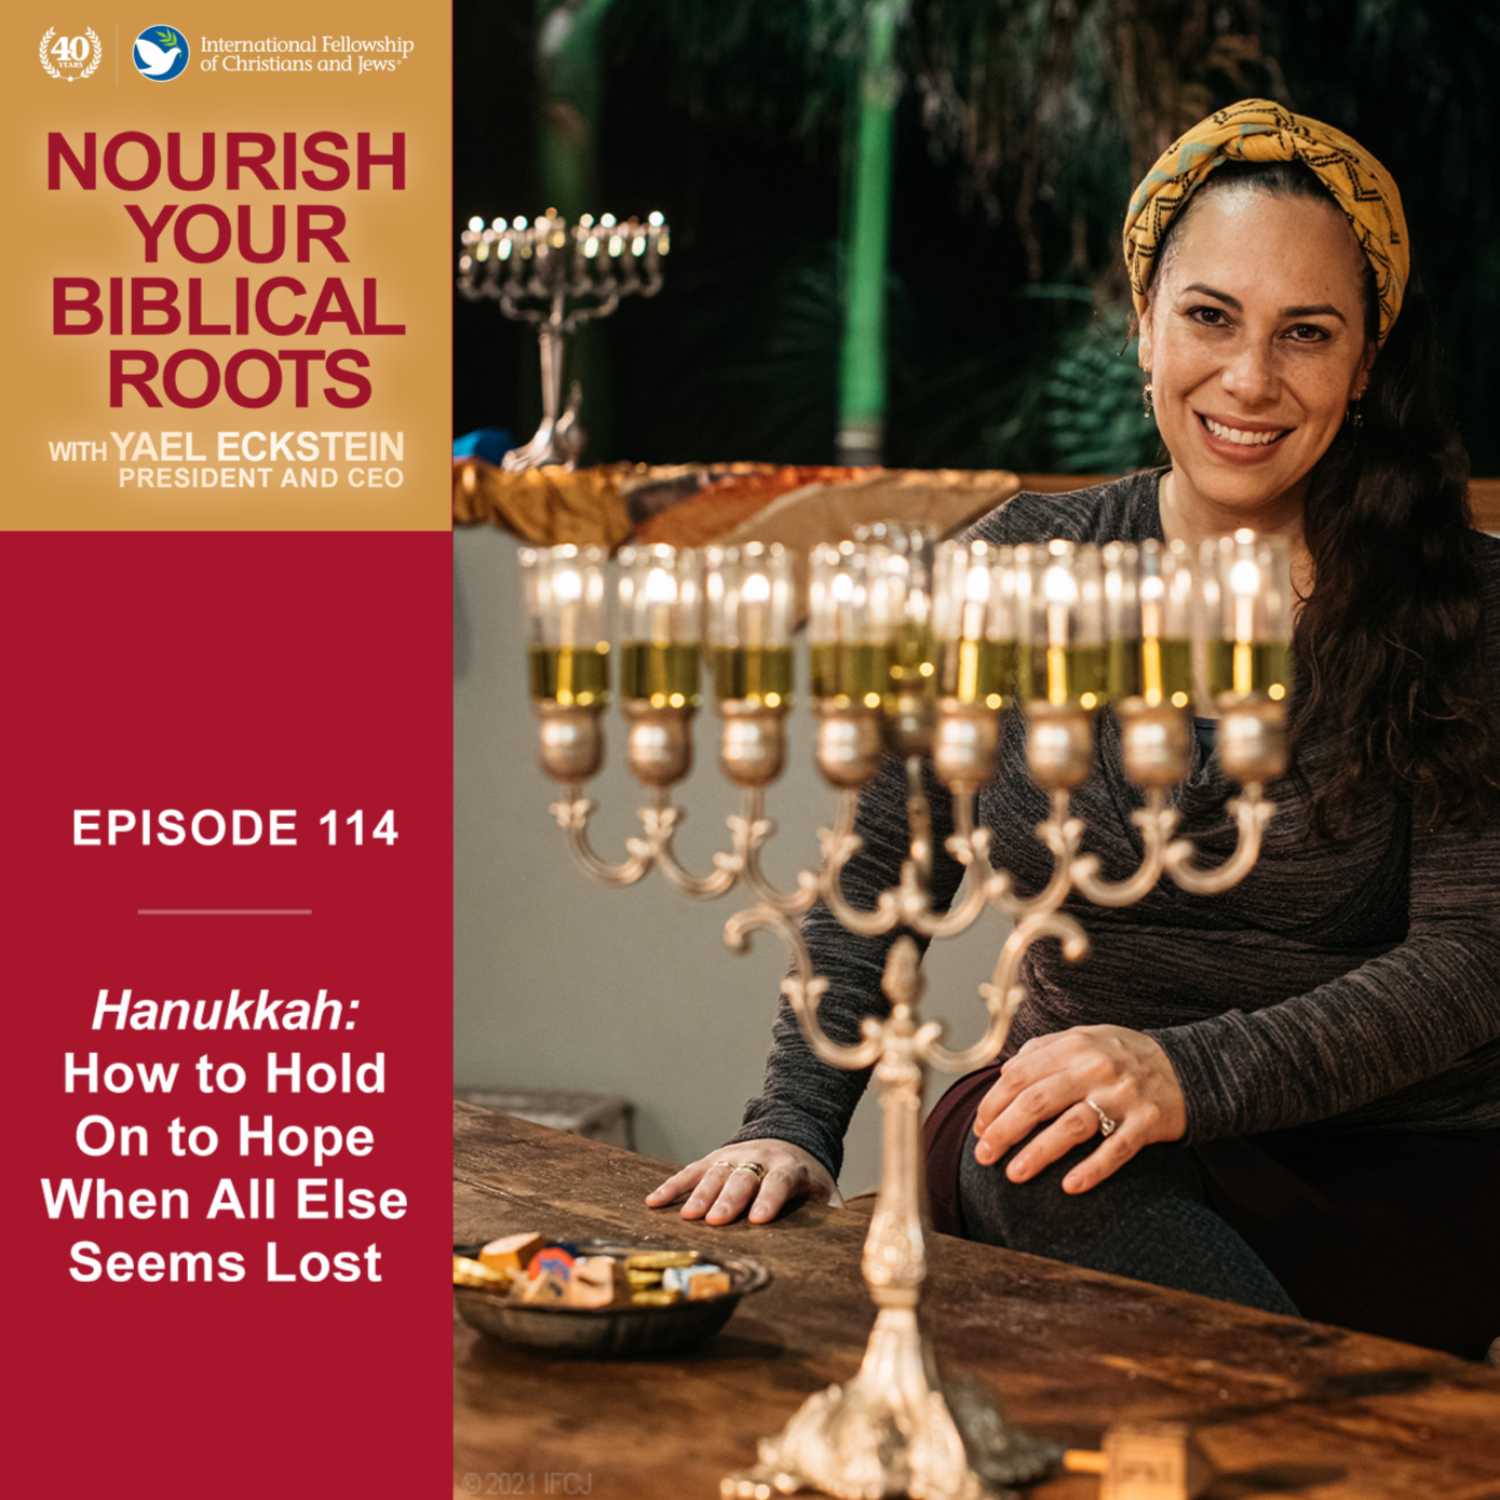 Hanukkah: How to Hold On to Hope When All Else Seems Lost